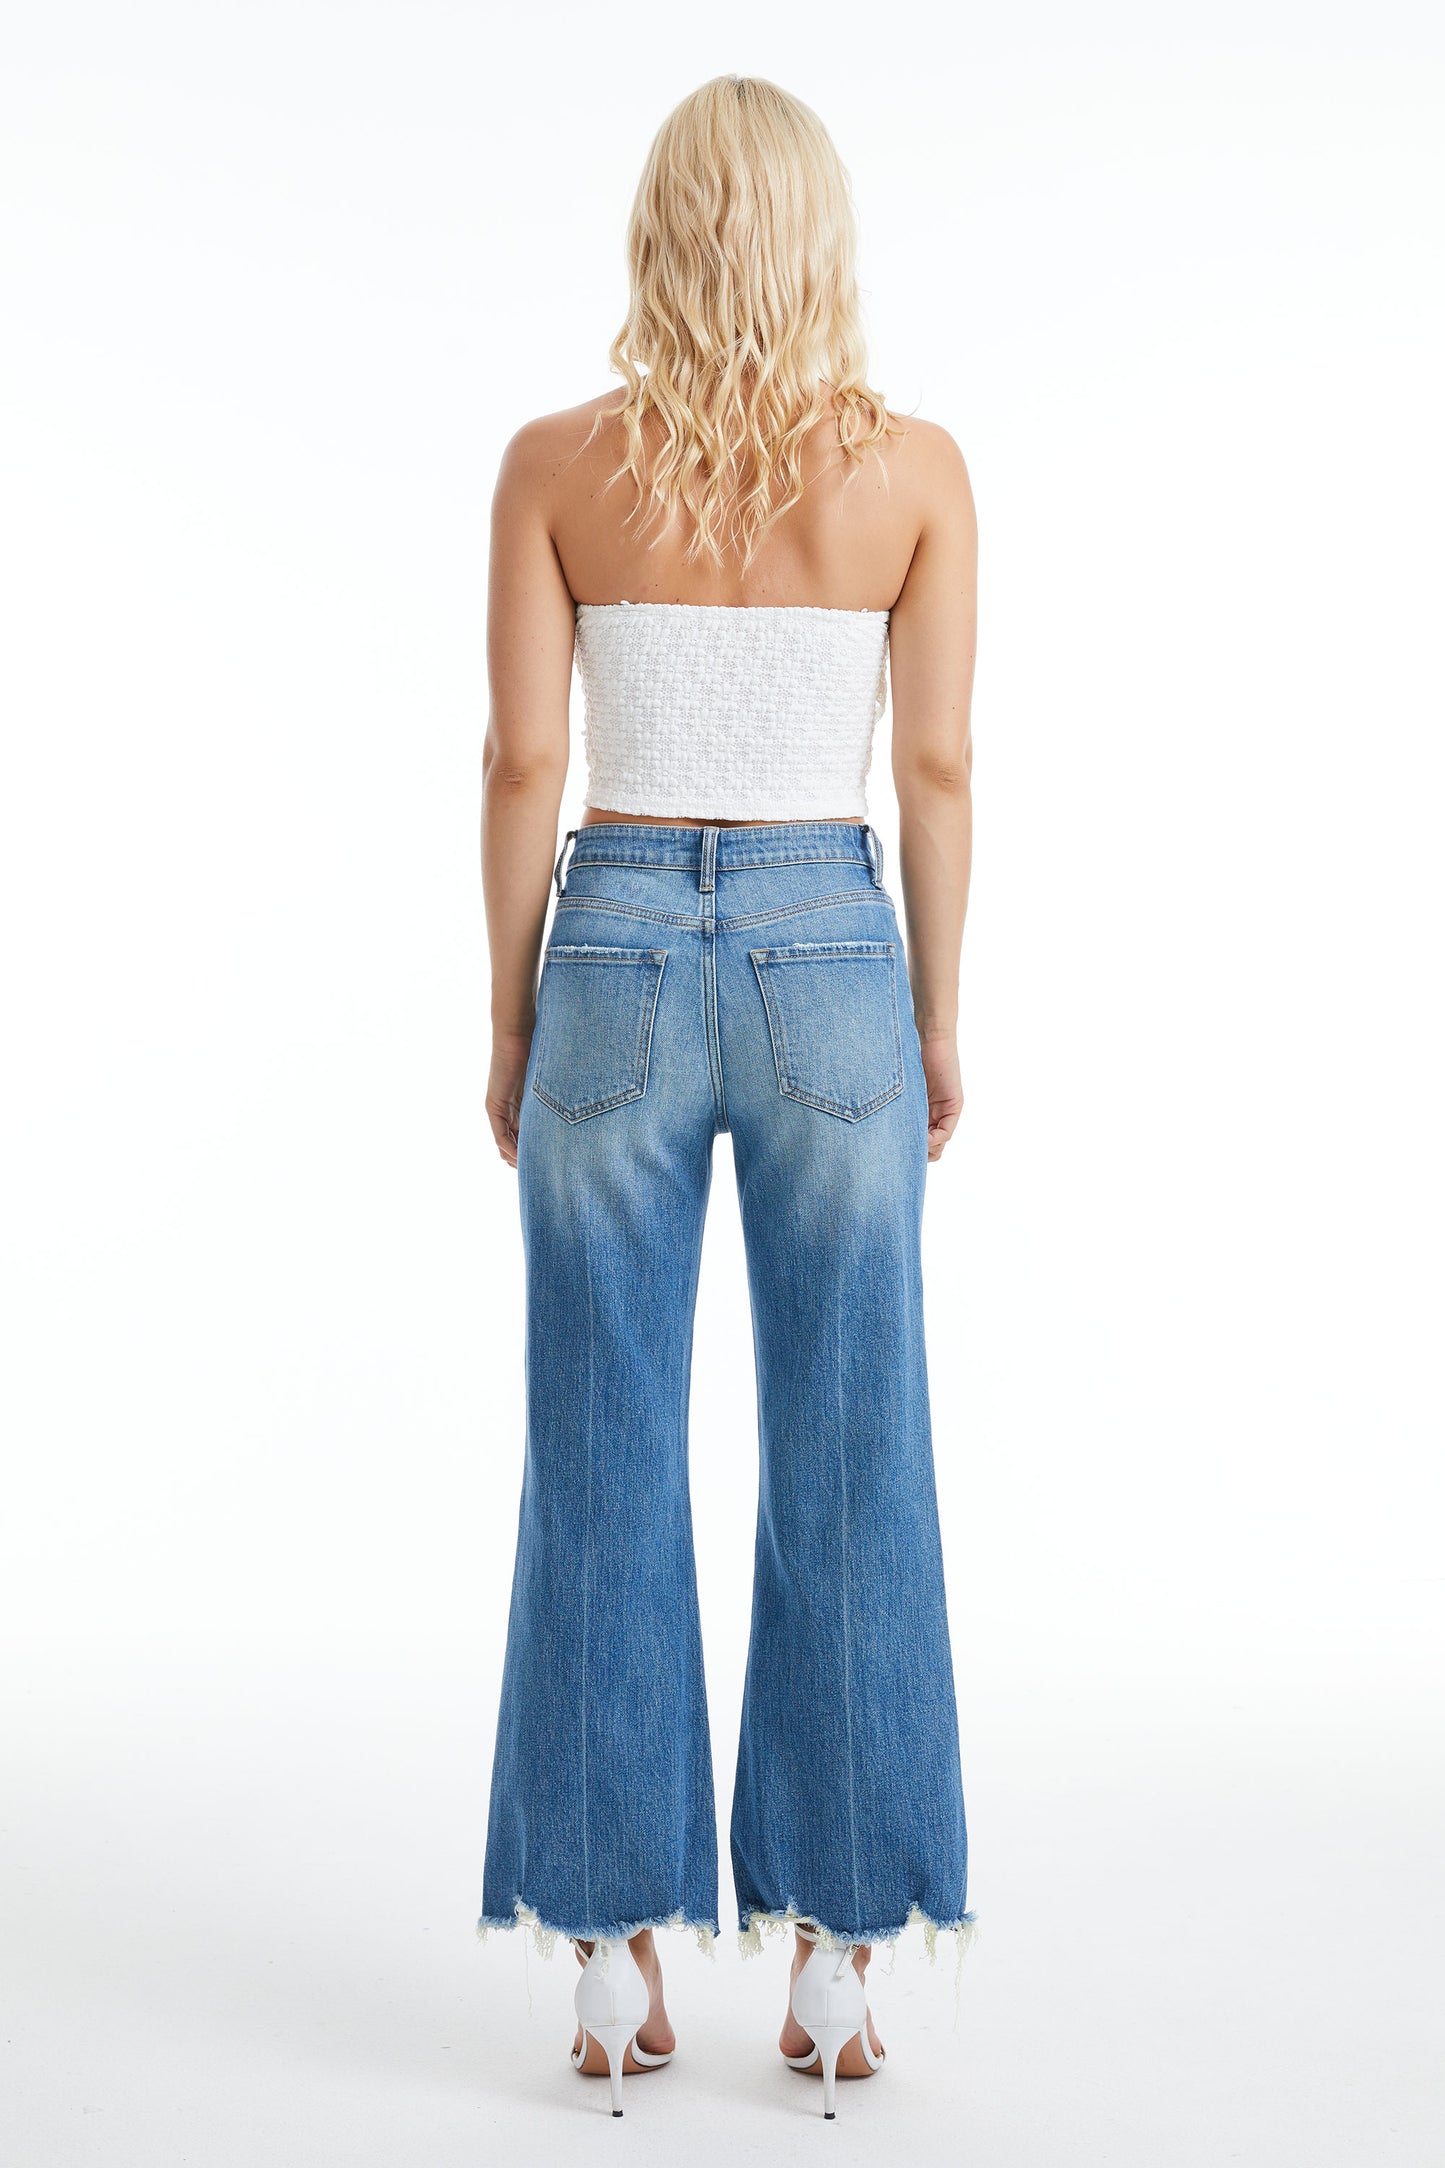 HIGH RISE WIDE LEG JEANS WITH FRAYED HEM BYW8132 (BYLY009) TURQUOISE